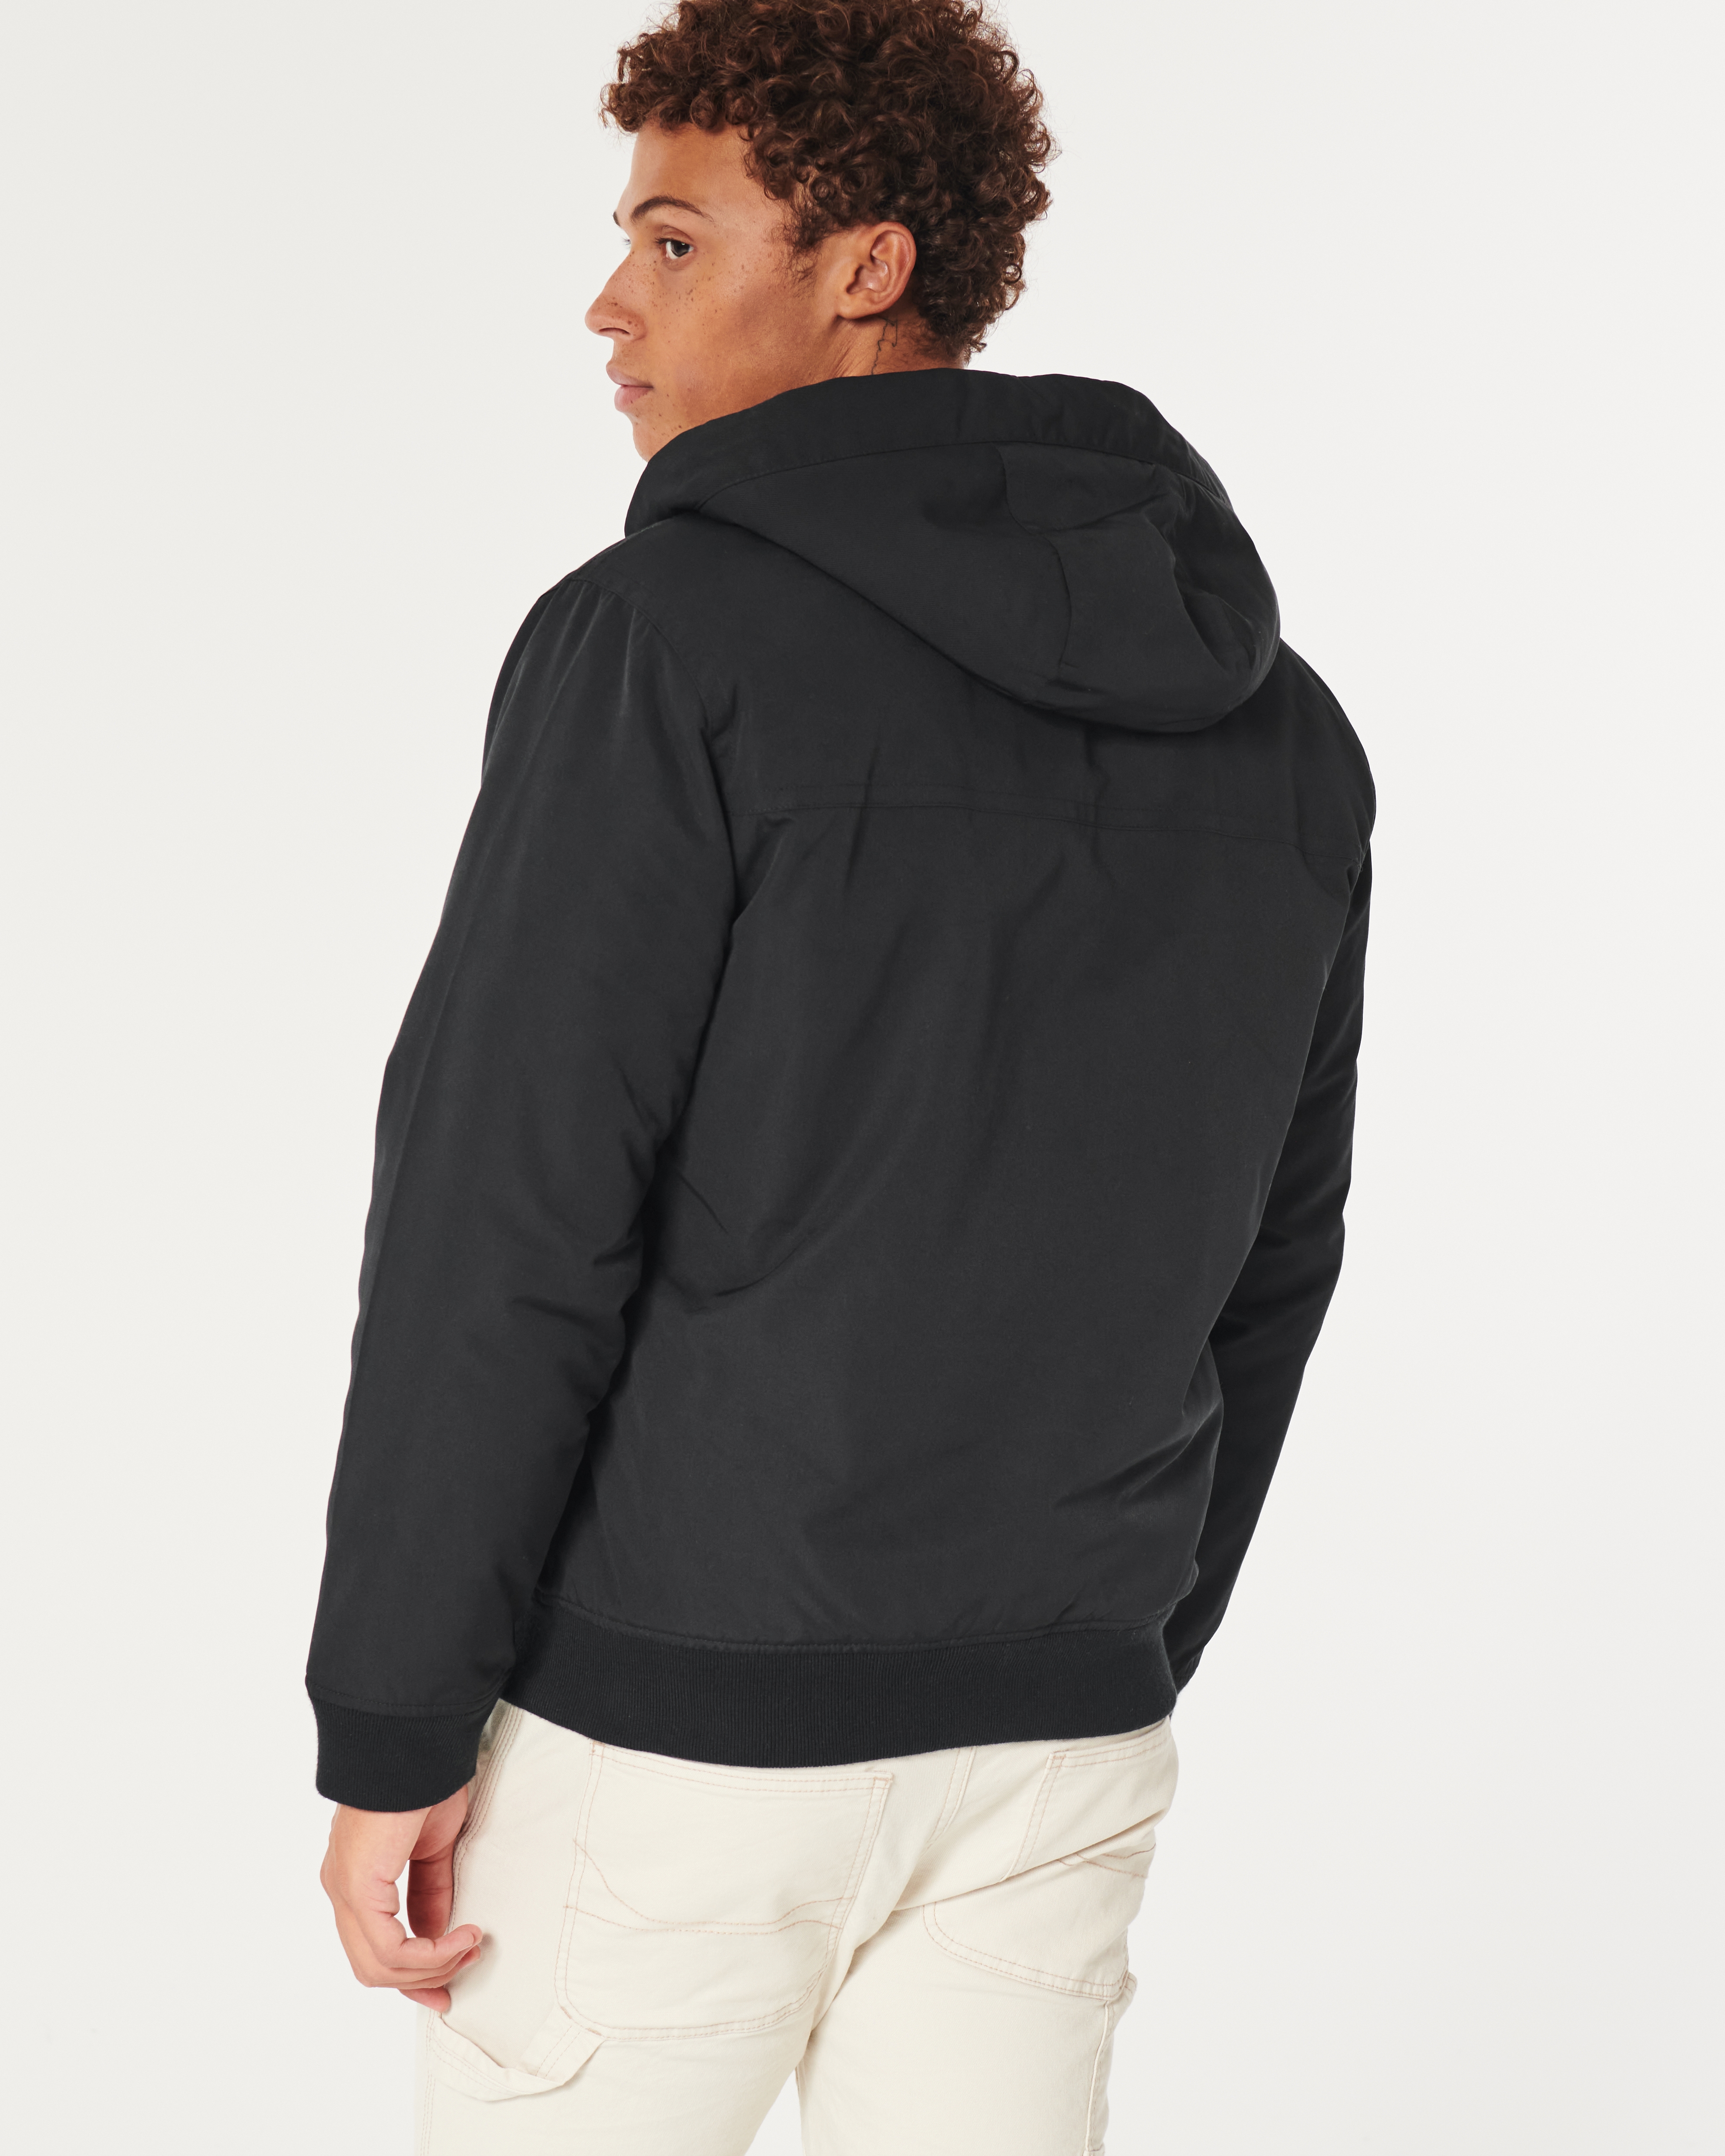 Hollister Faux Fur-lined All-weather Bomber Jacket in Black